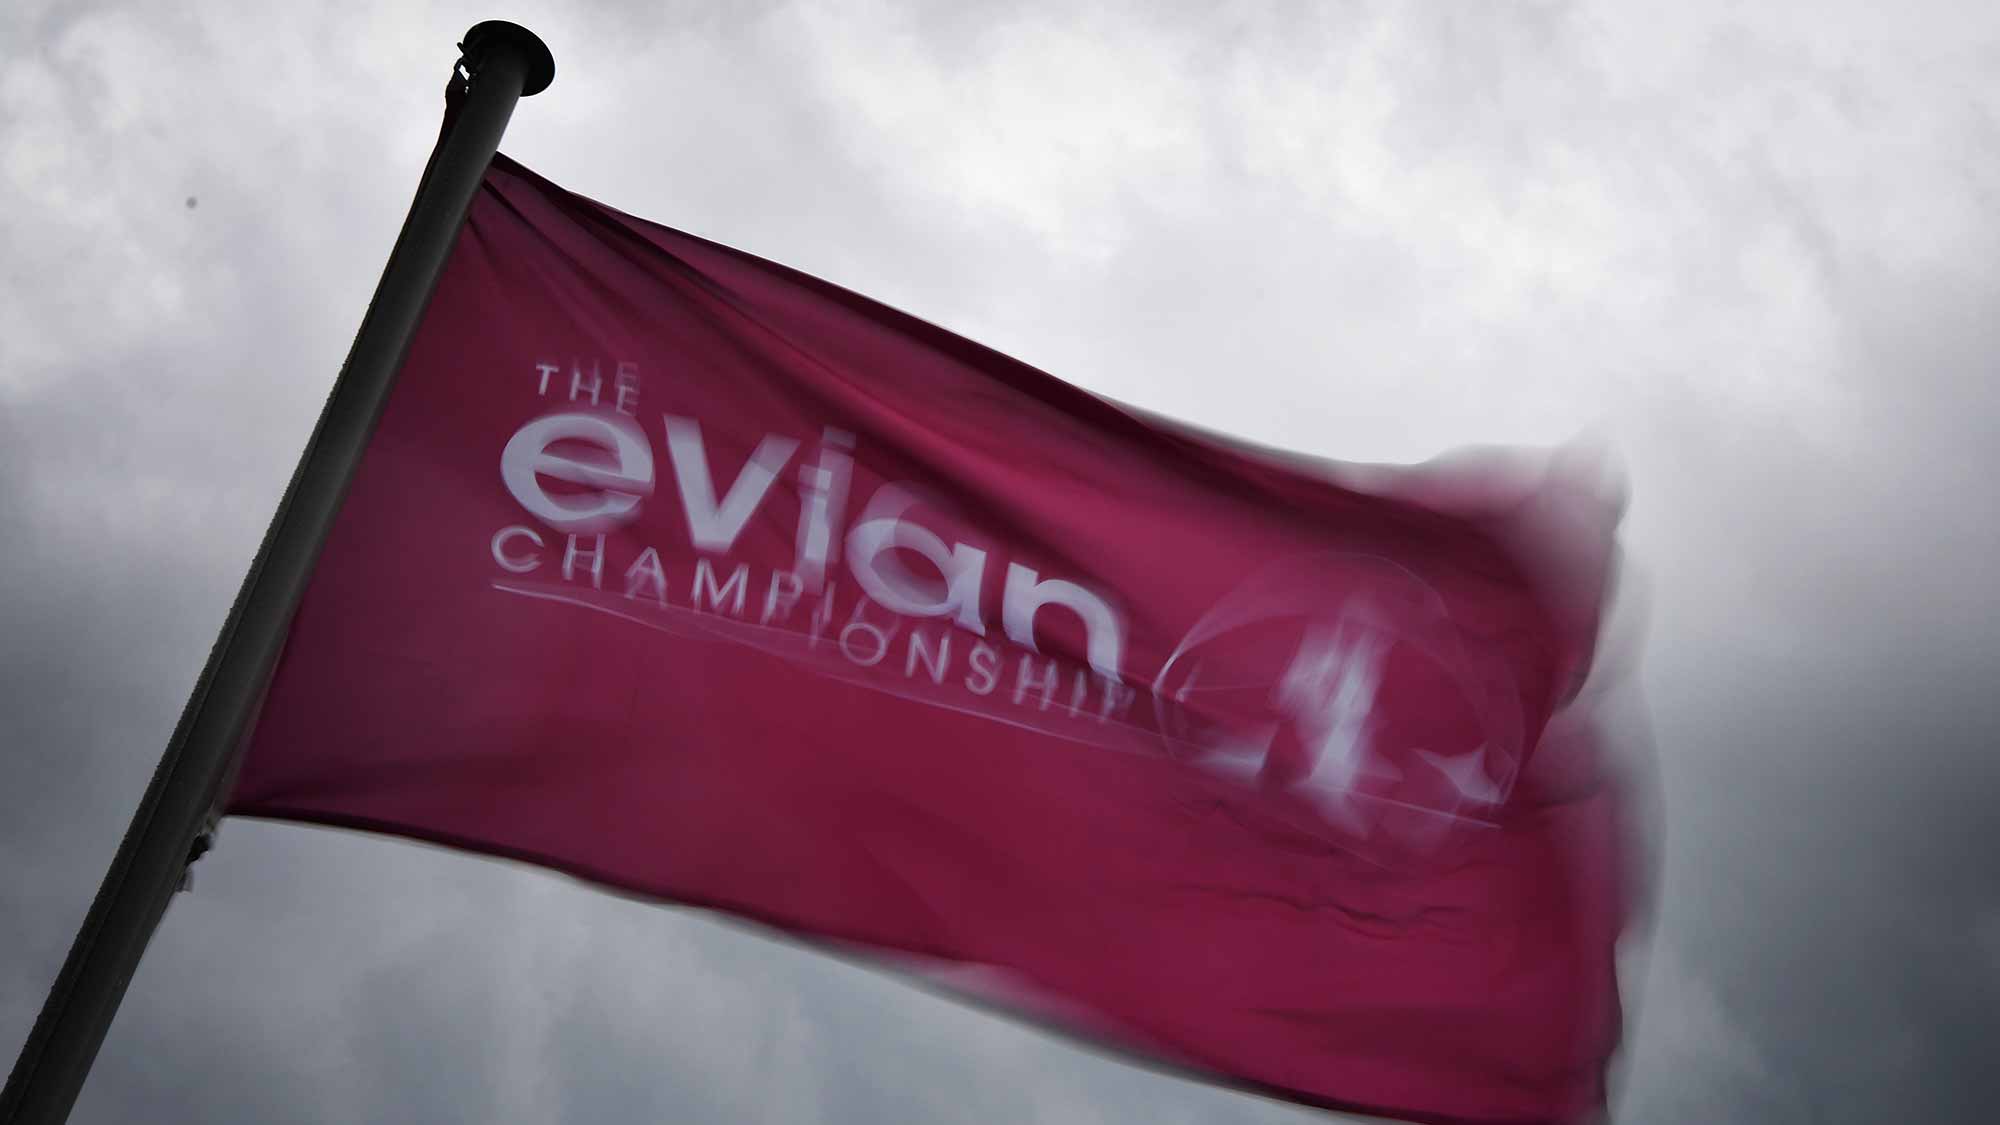 A flag flies in the strong wind during the first round of The Evian Championship